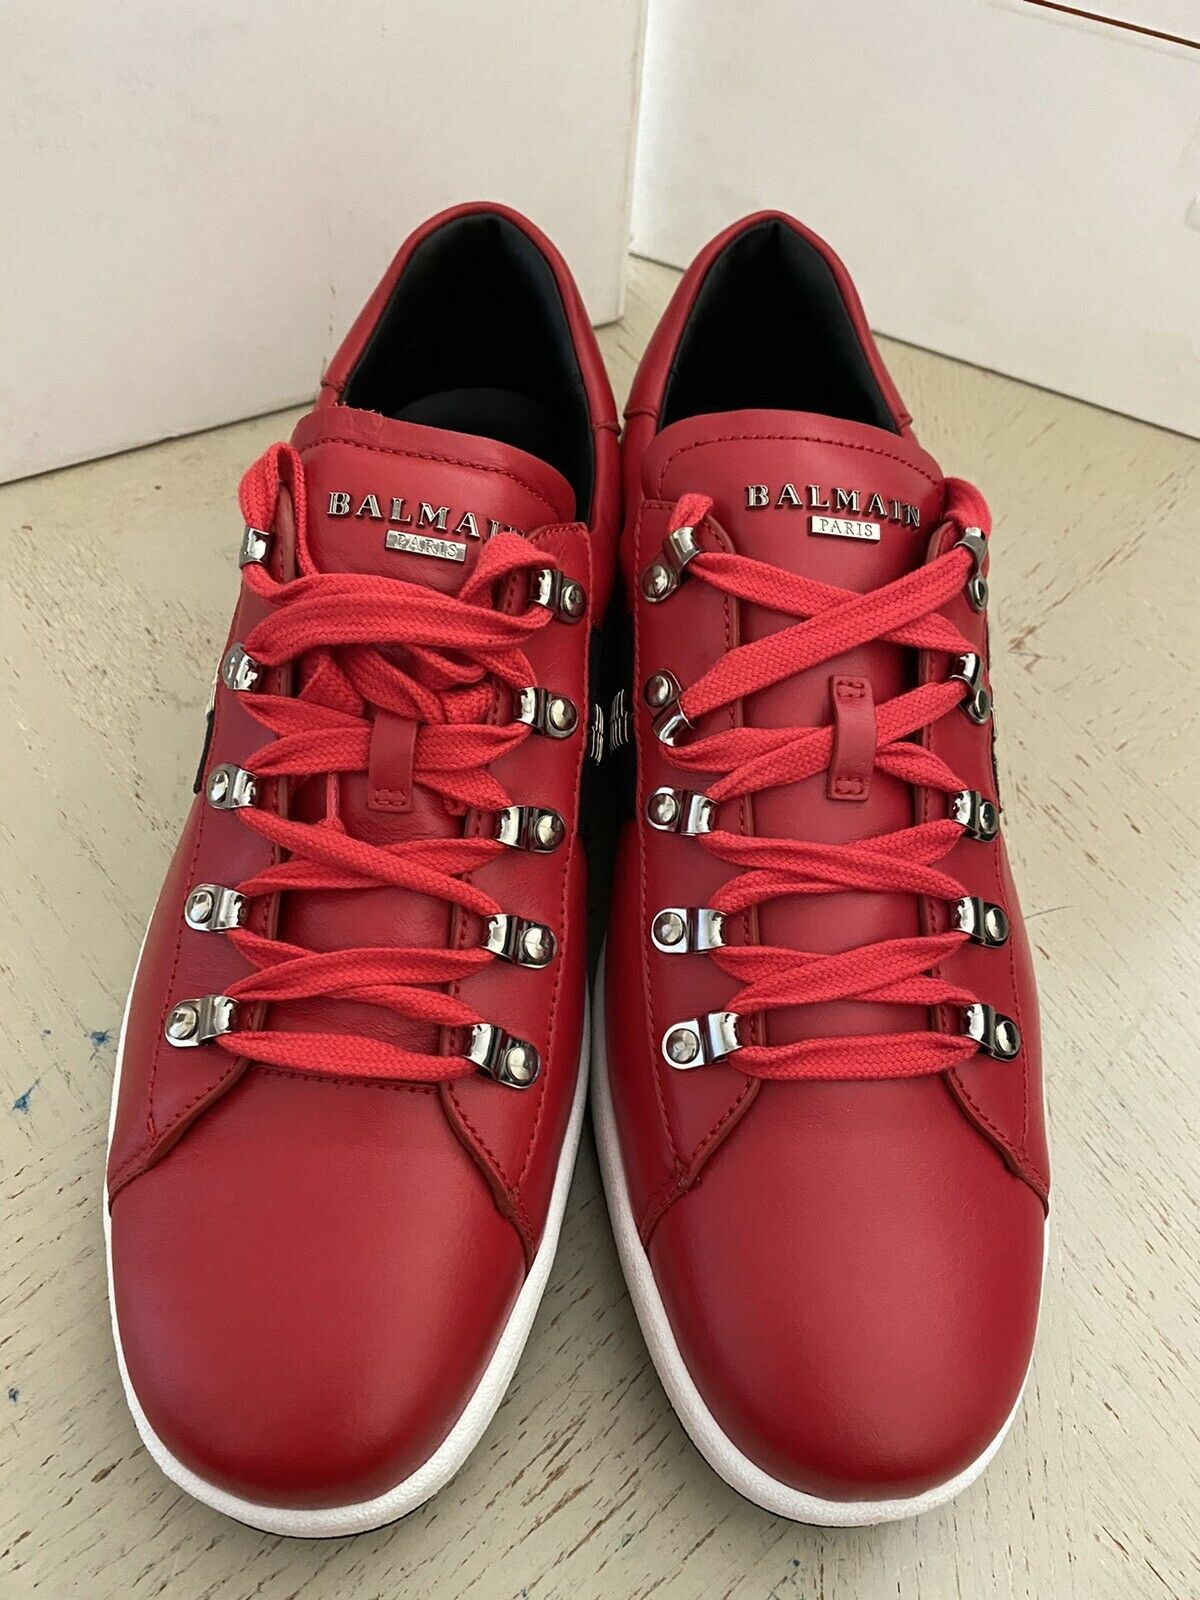 New $695 Balmain Lace-Up Low-Top Leather Sneakers Red 12 US/45 Eu